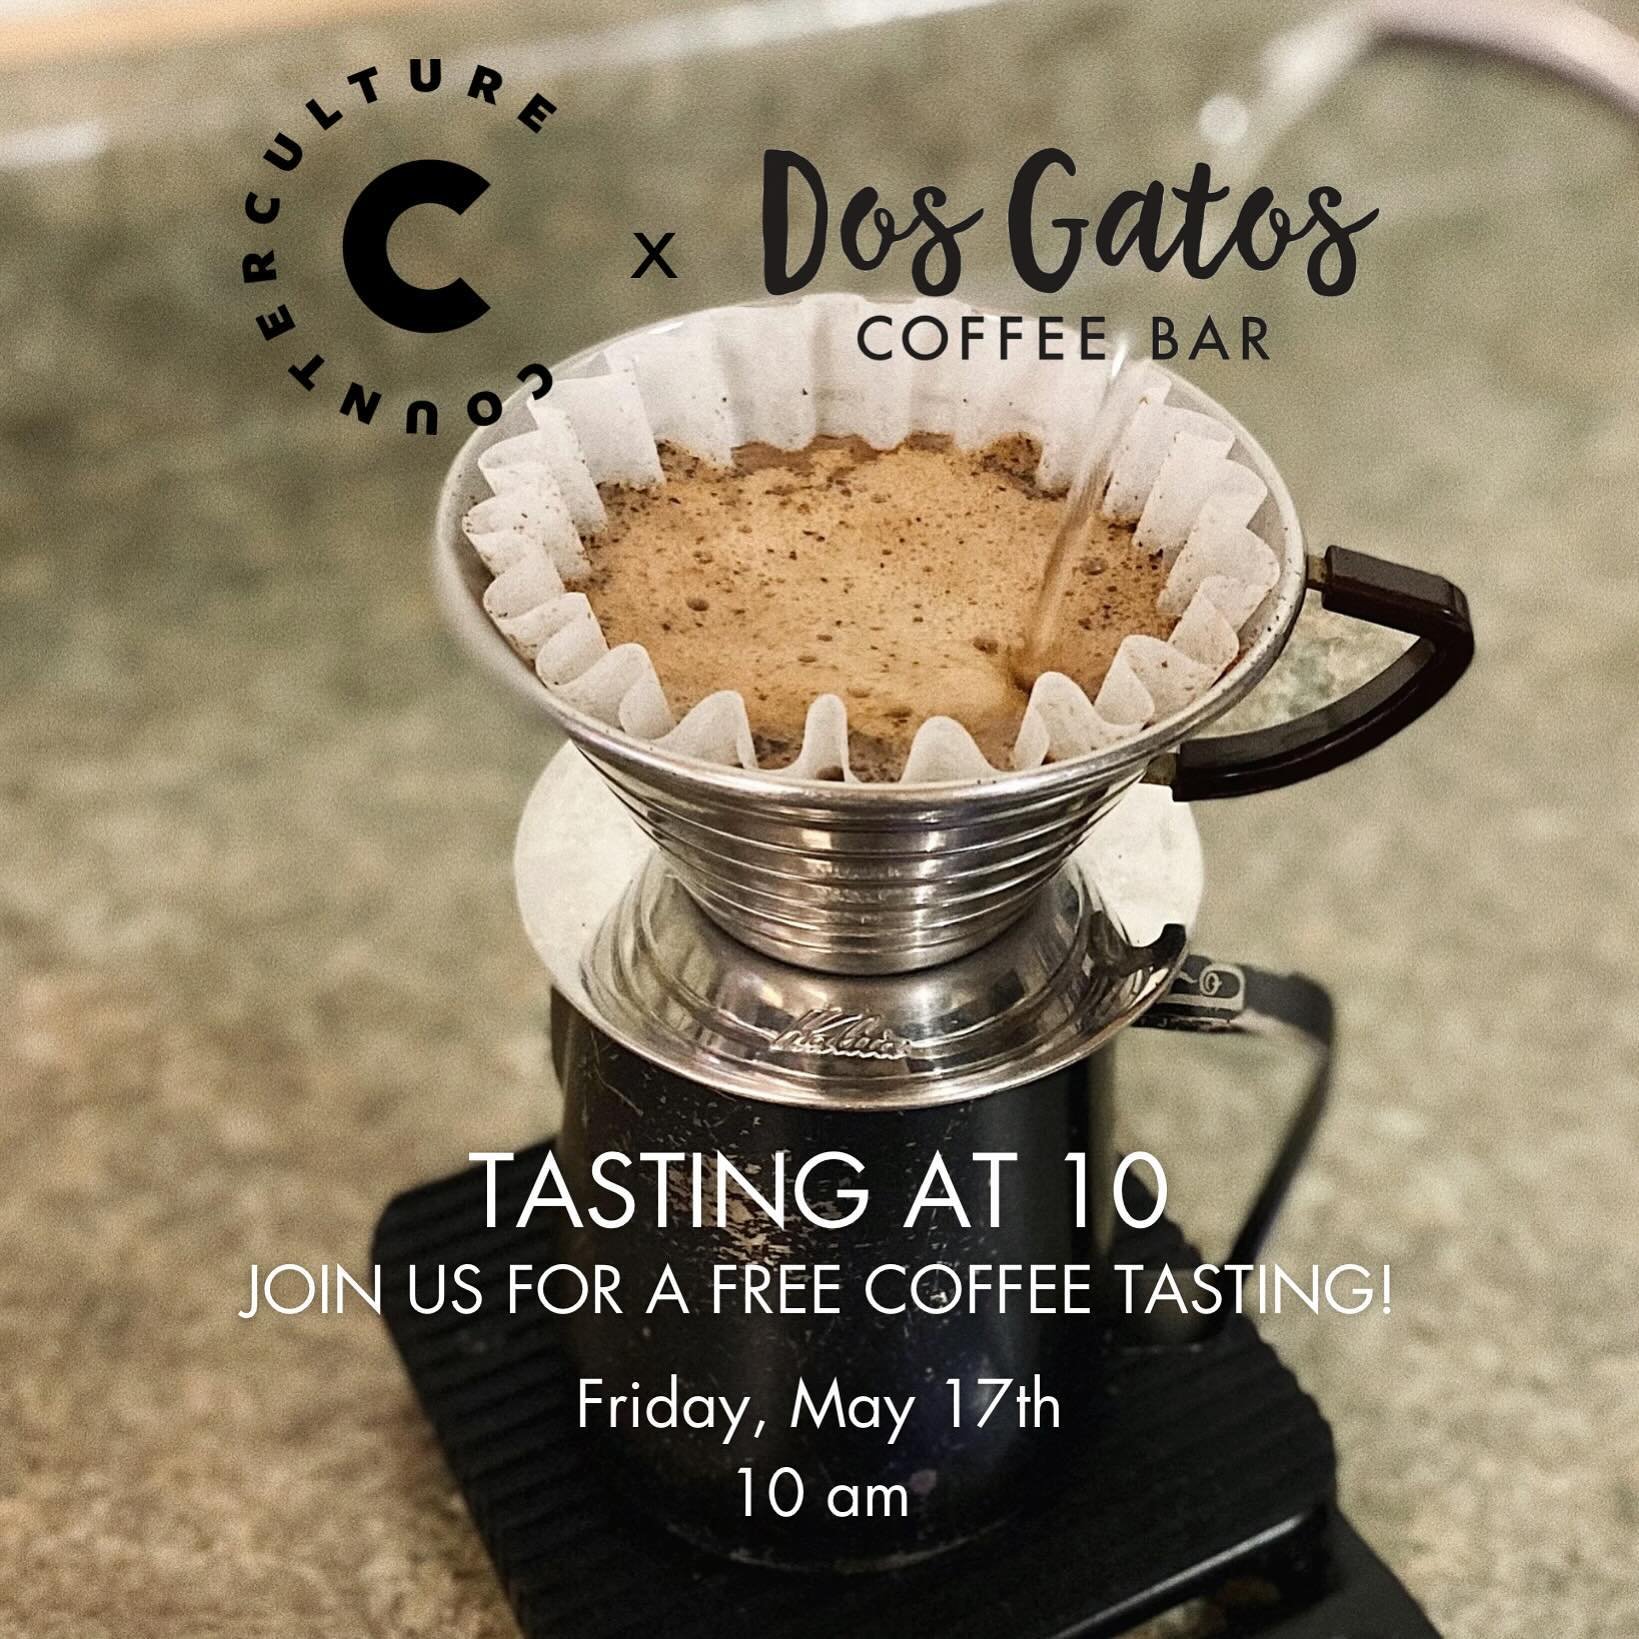 🚨EXCITING ANNOUNCEMENT🚨
Next week, Friday May 17th at 10 am, we&rsquo;ll be having a FREE pop-up coffee tasting hosted by @counterculturecoffee 

This event is part of their Tasting at 10 series! They typically host these events every Friday at the